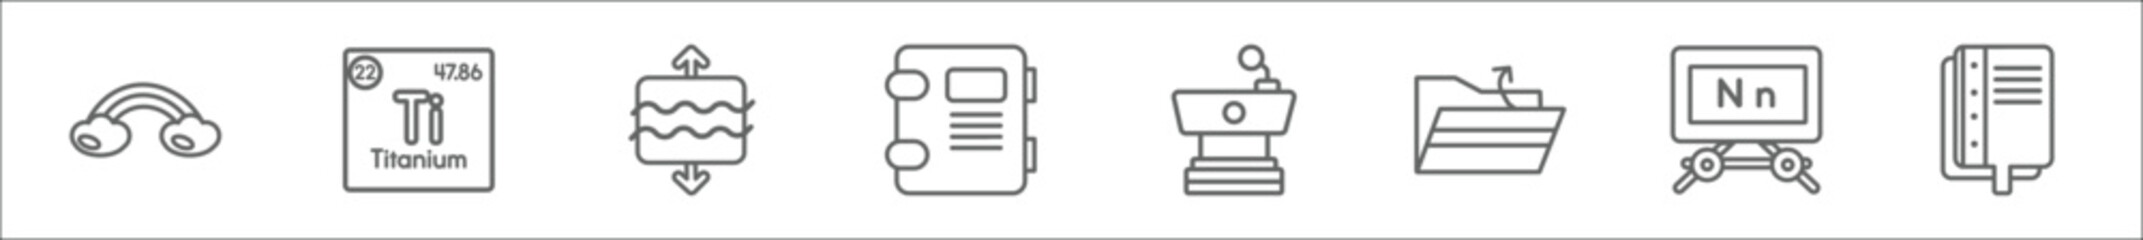 outline set of education line icons. linear vector icons such as basic rainbow, is an element of, archimedes principle, agenda with bookmarks, classroom tribune, open file, uppercase and lowercase